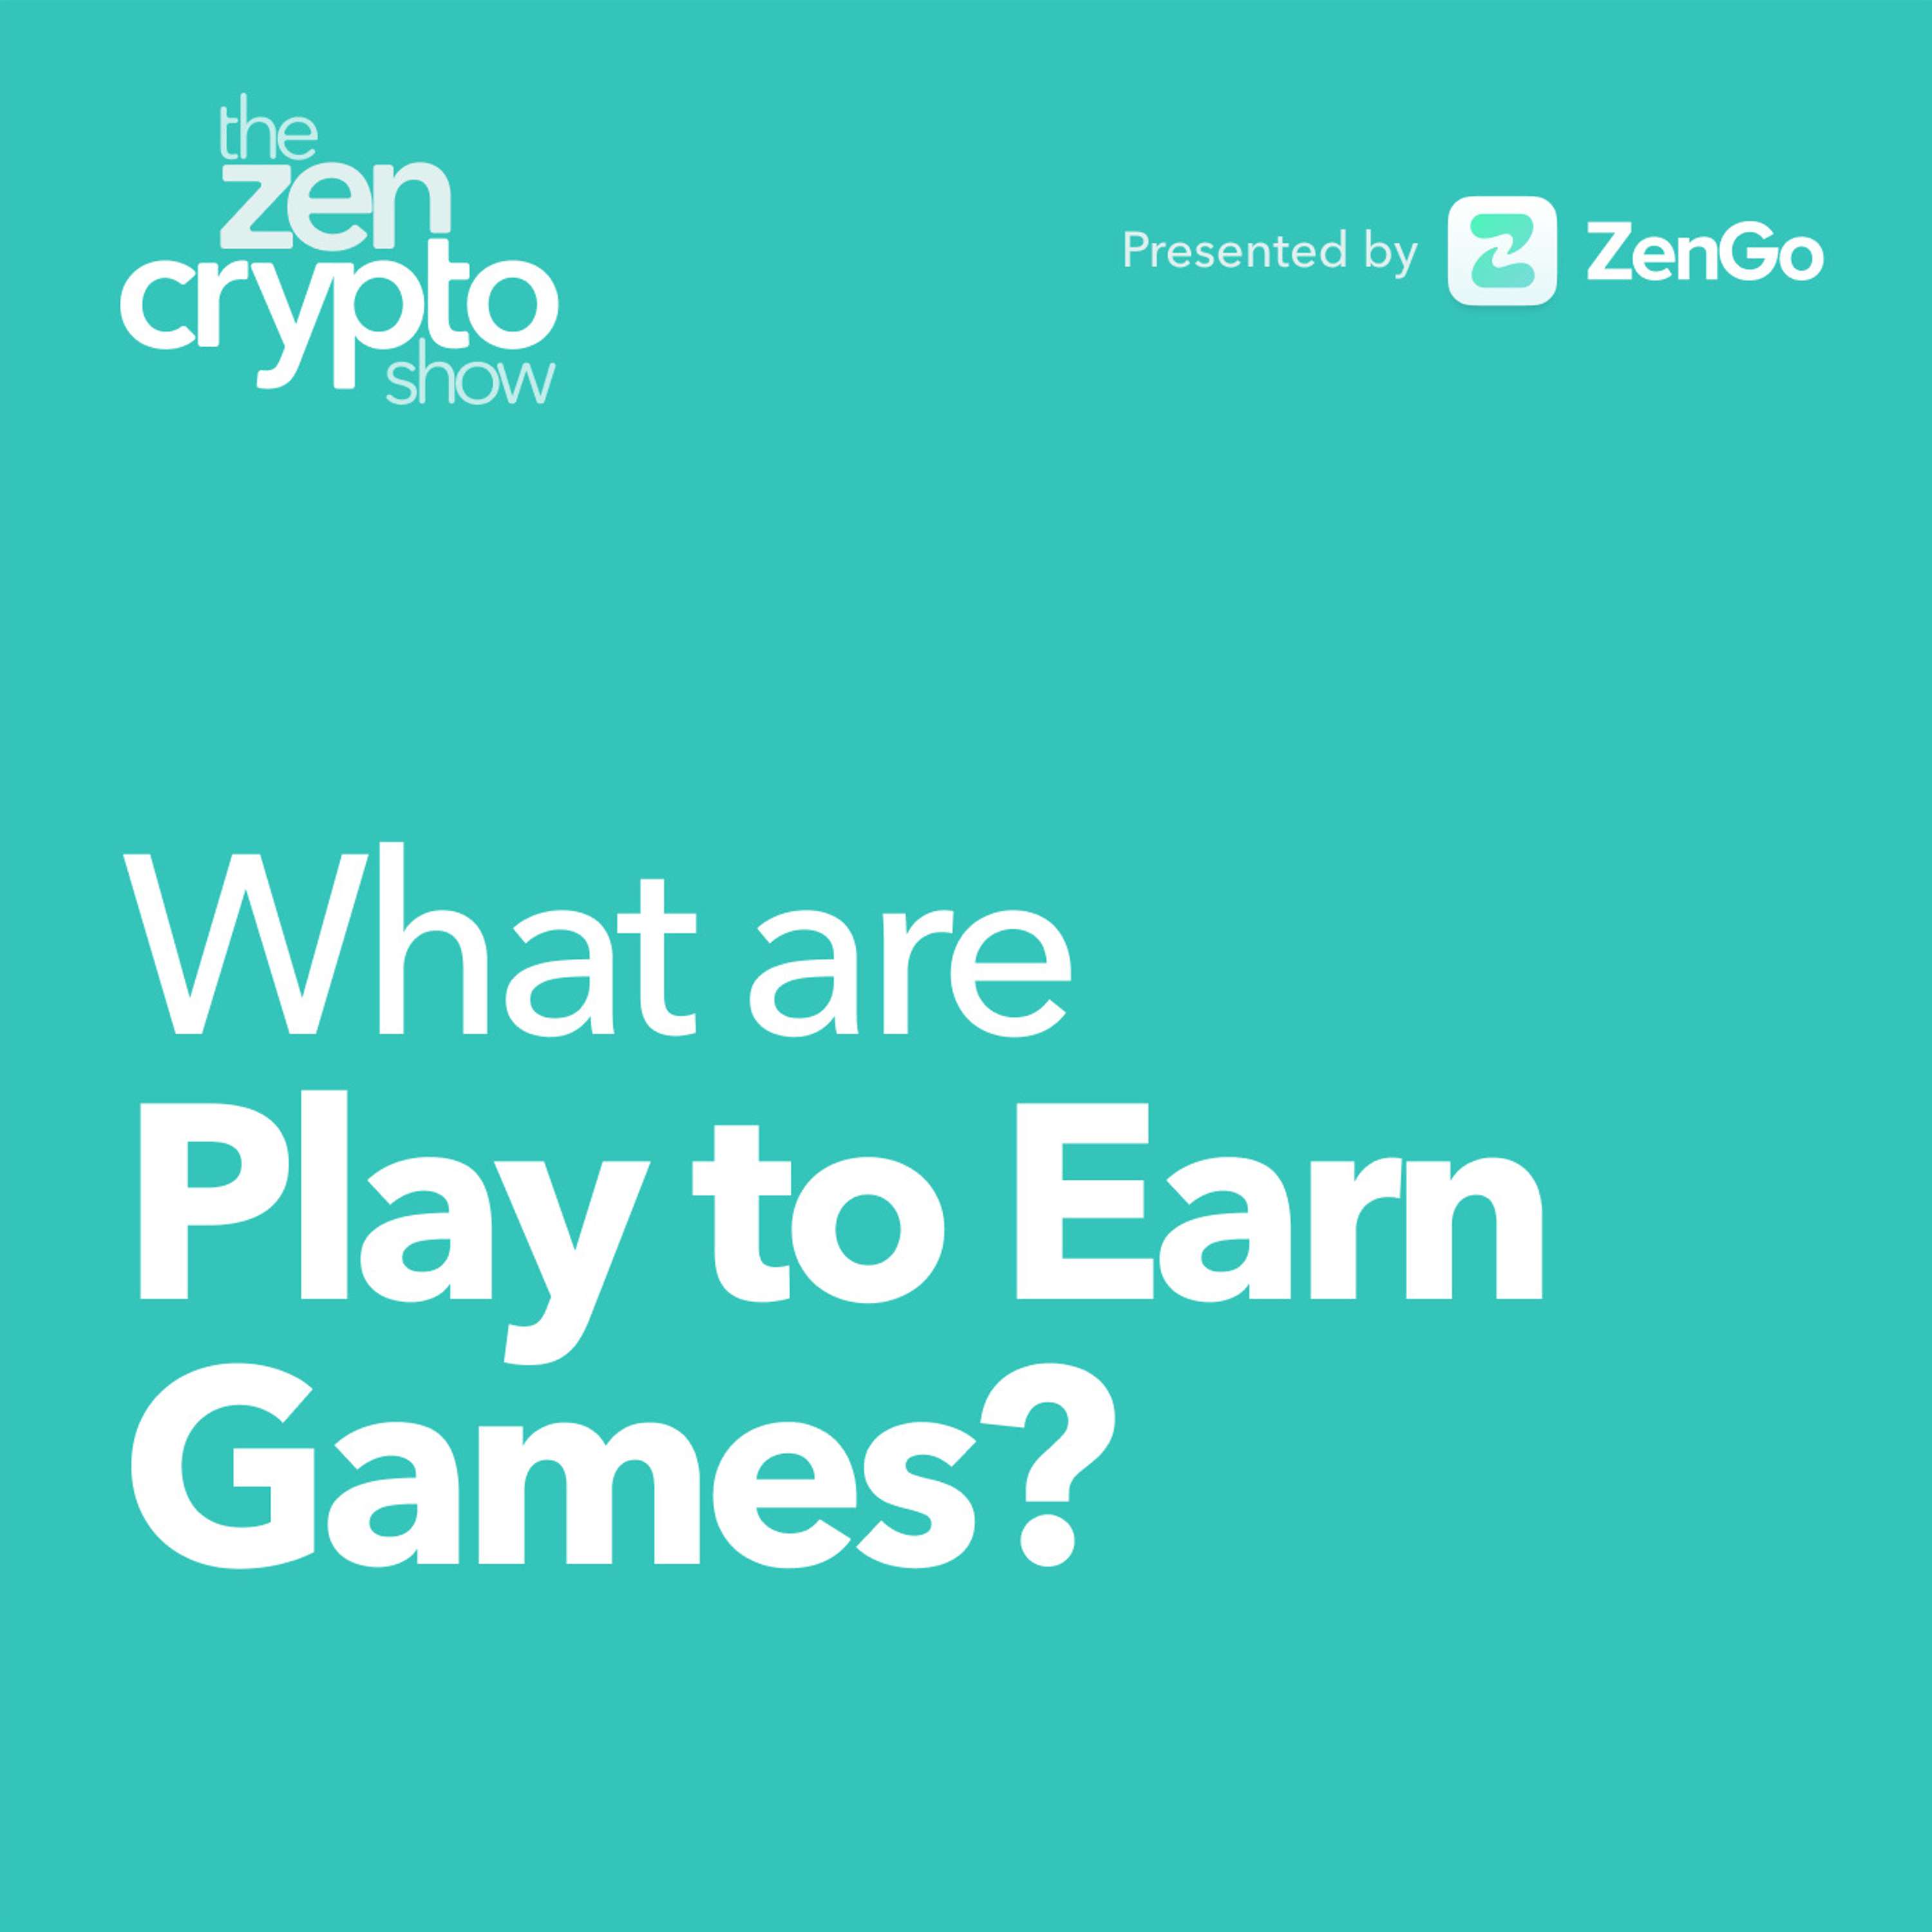 What are play to earn games?